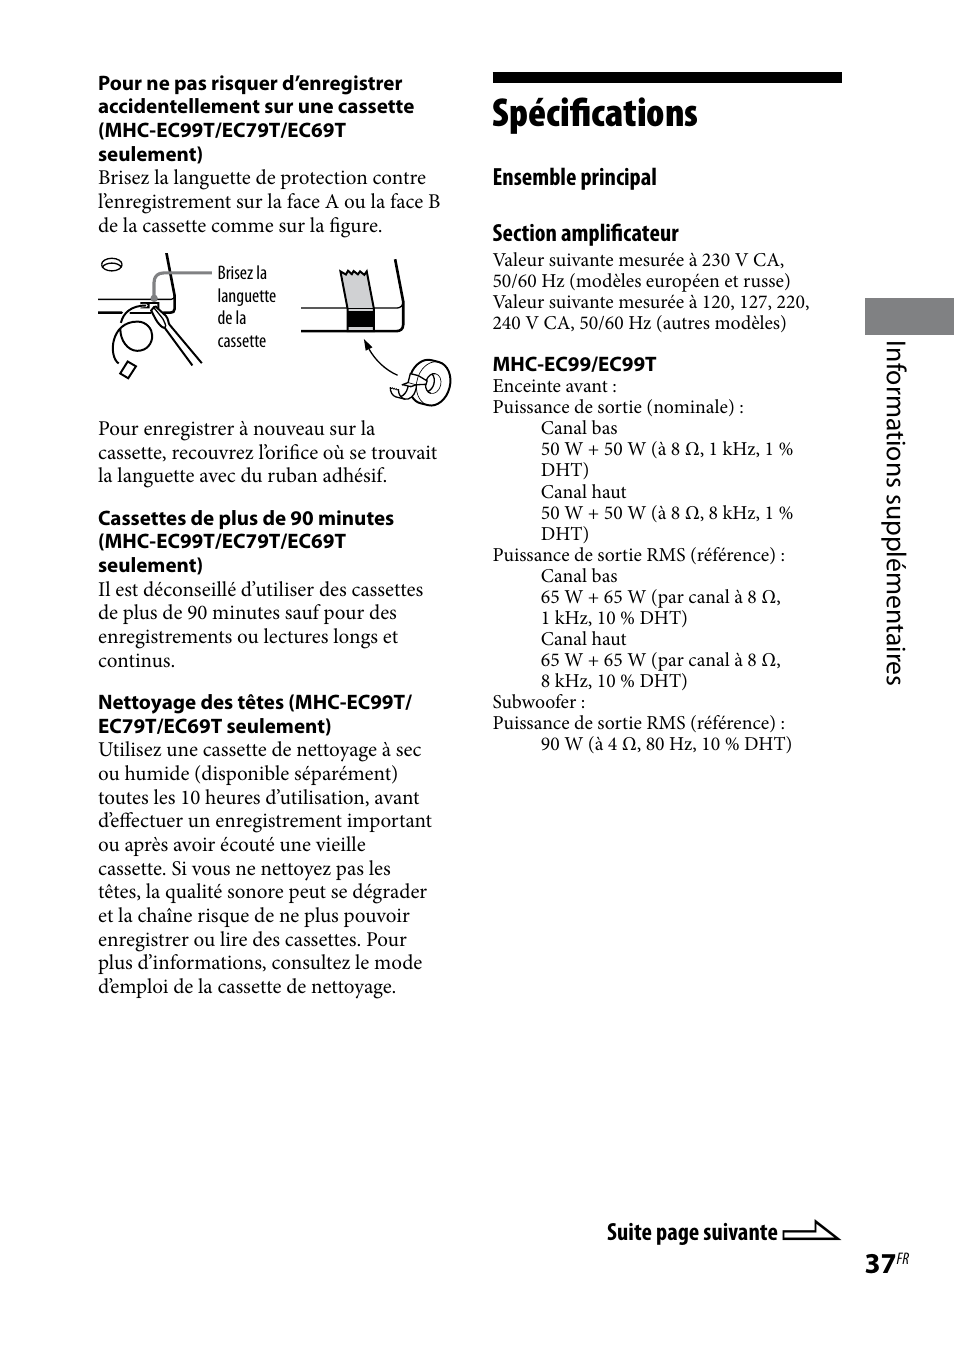 Spécifications, Inf or ma tions supplémen tair es | Sony MHC-EC69 Manuel d'utilisation | Page 37 / 44